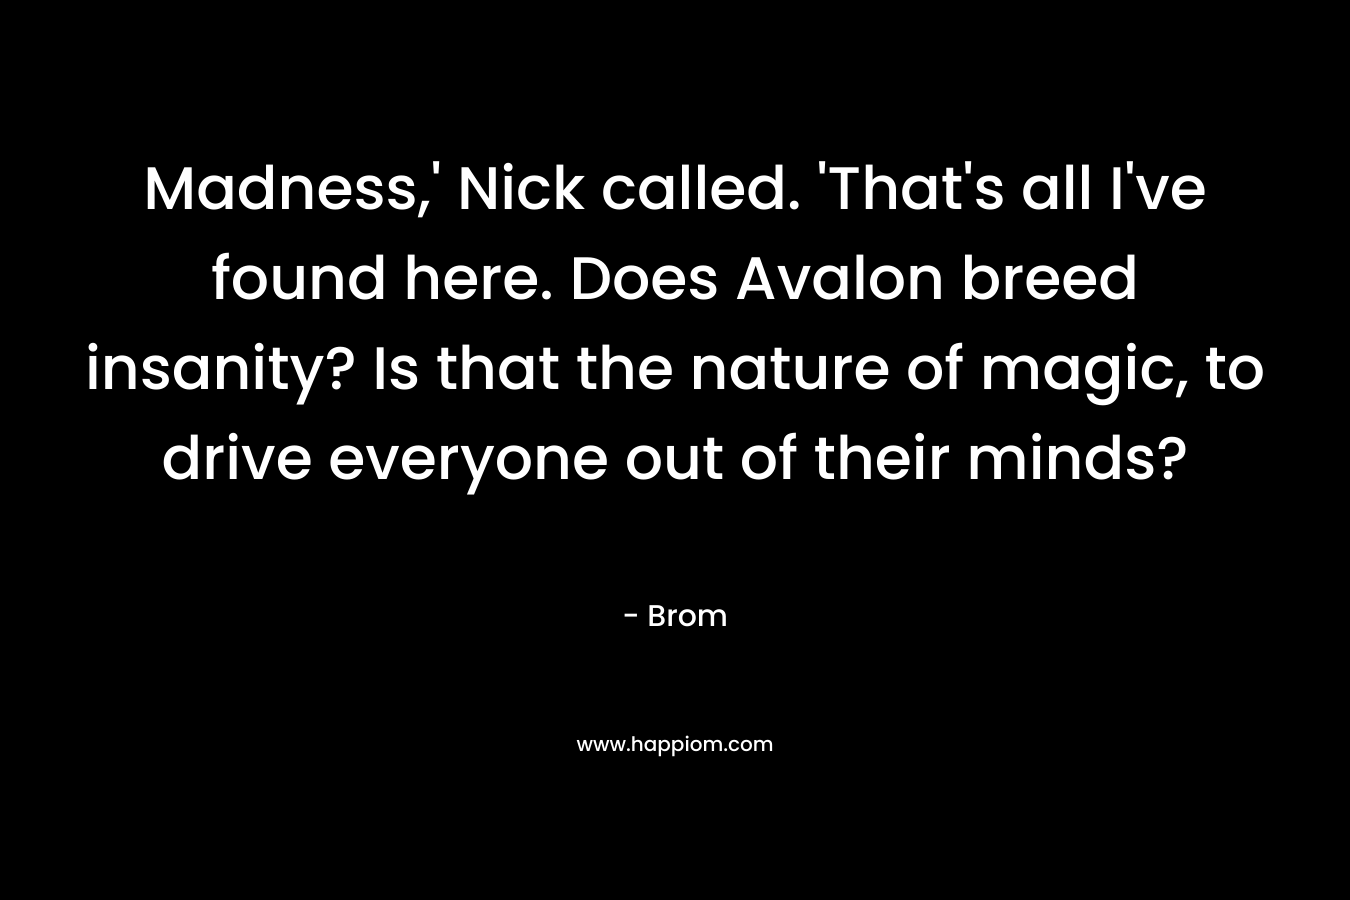 Madness,’ Nick called. ‘That’s all I’ve found here. Does Avalon breed insanity? Is that the nature of magic, to drive everyone out of their minds? – Brom